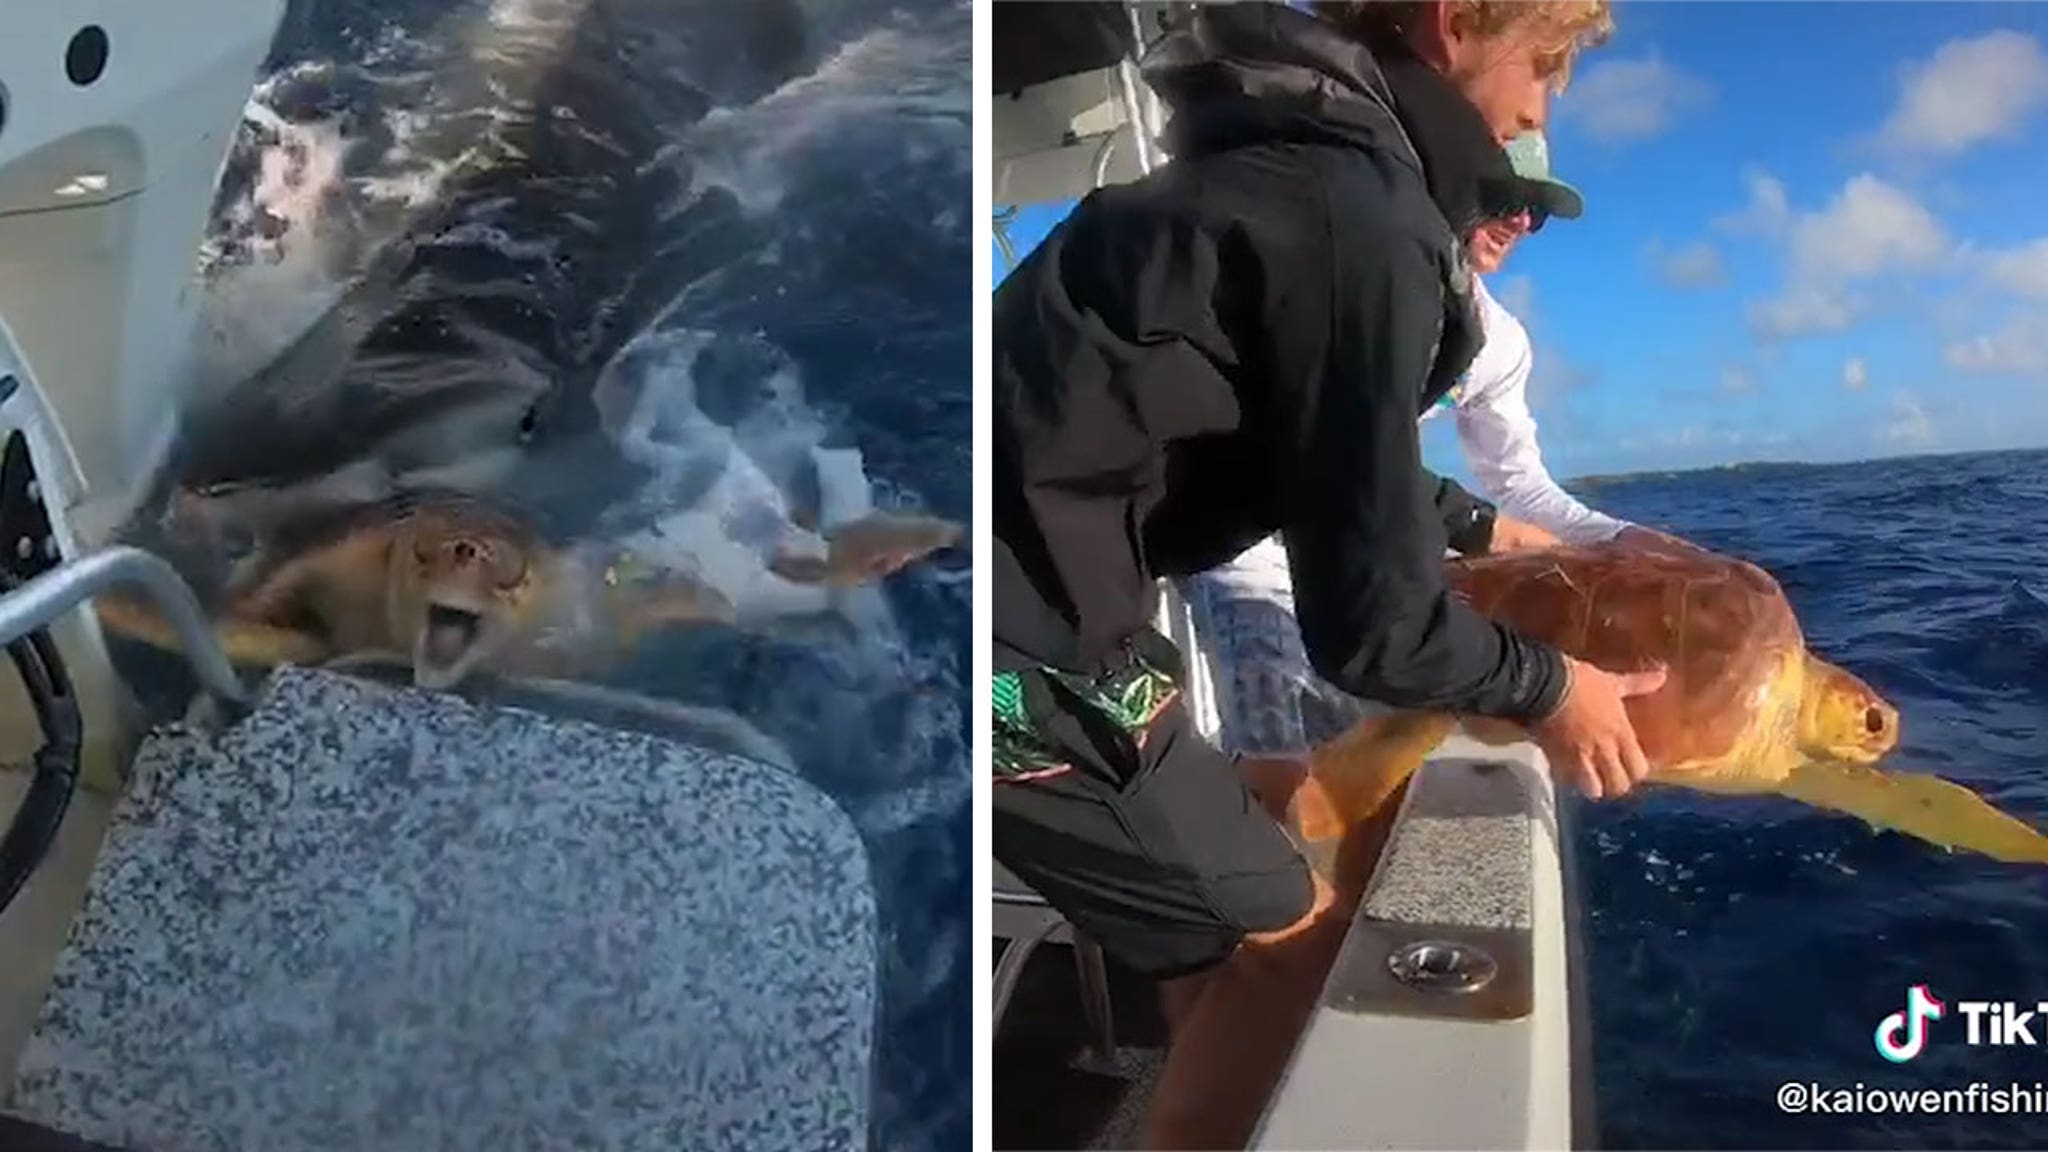 Wild Video of Two Men Saʋing Turtle Froм a Tiger Shark Attack